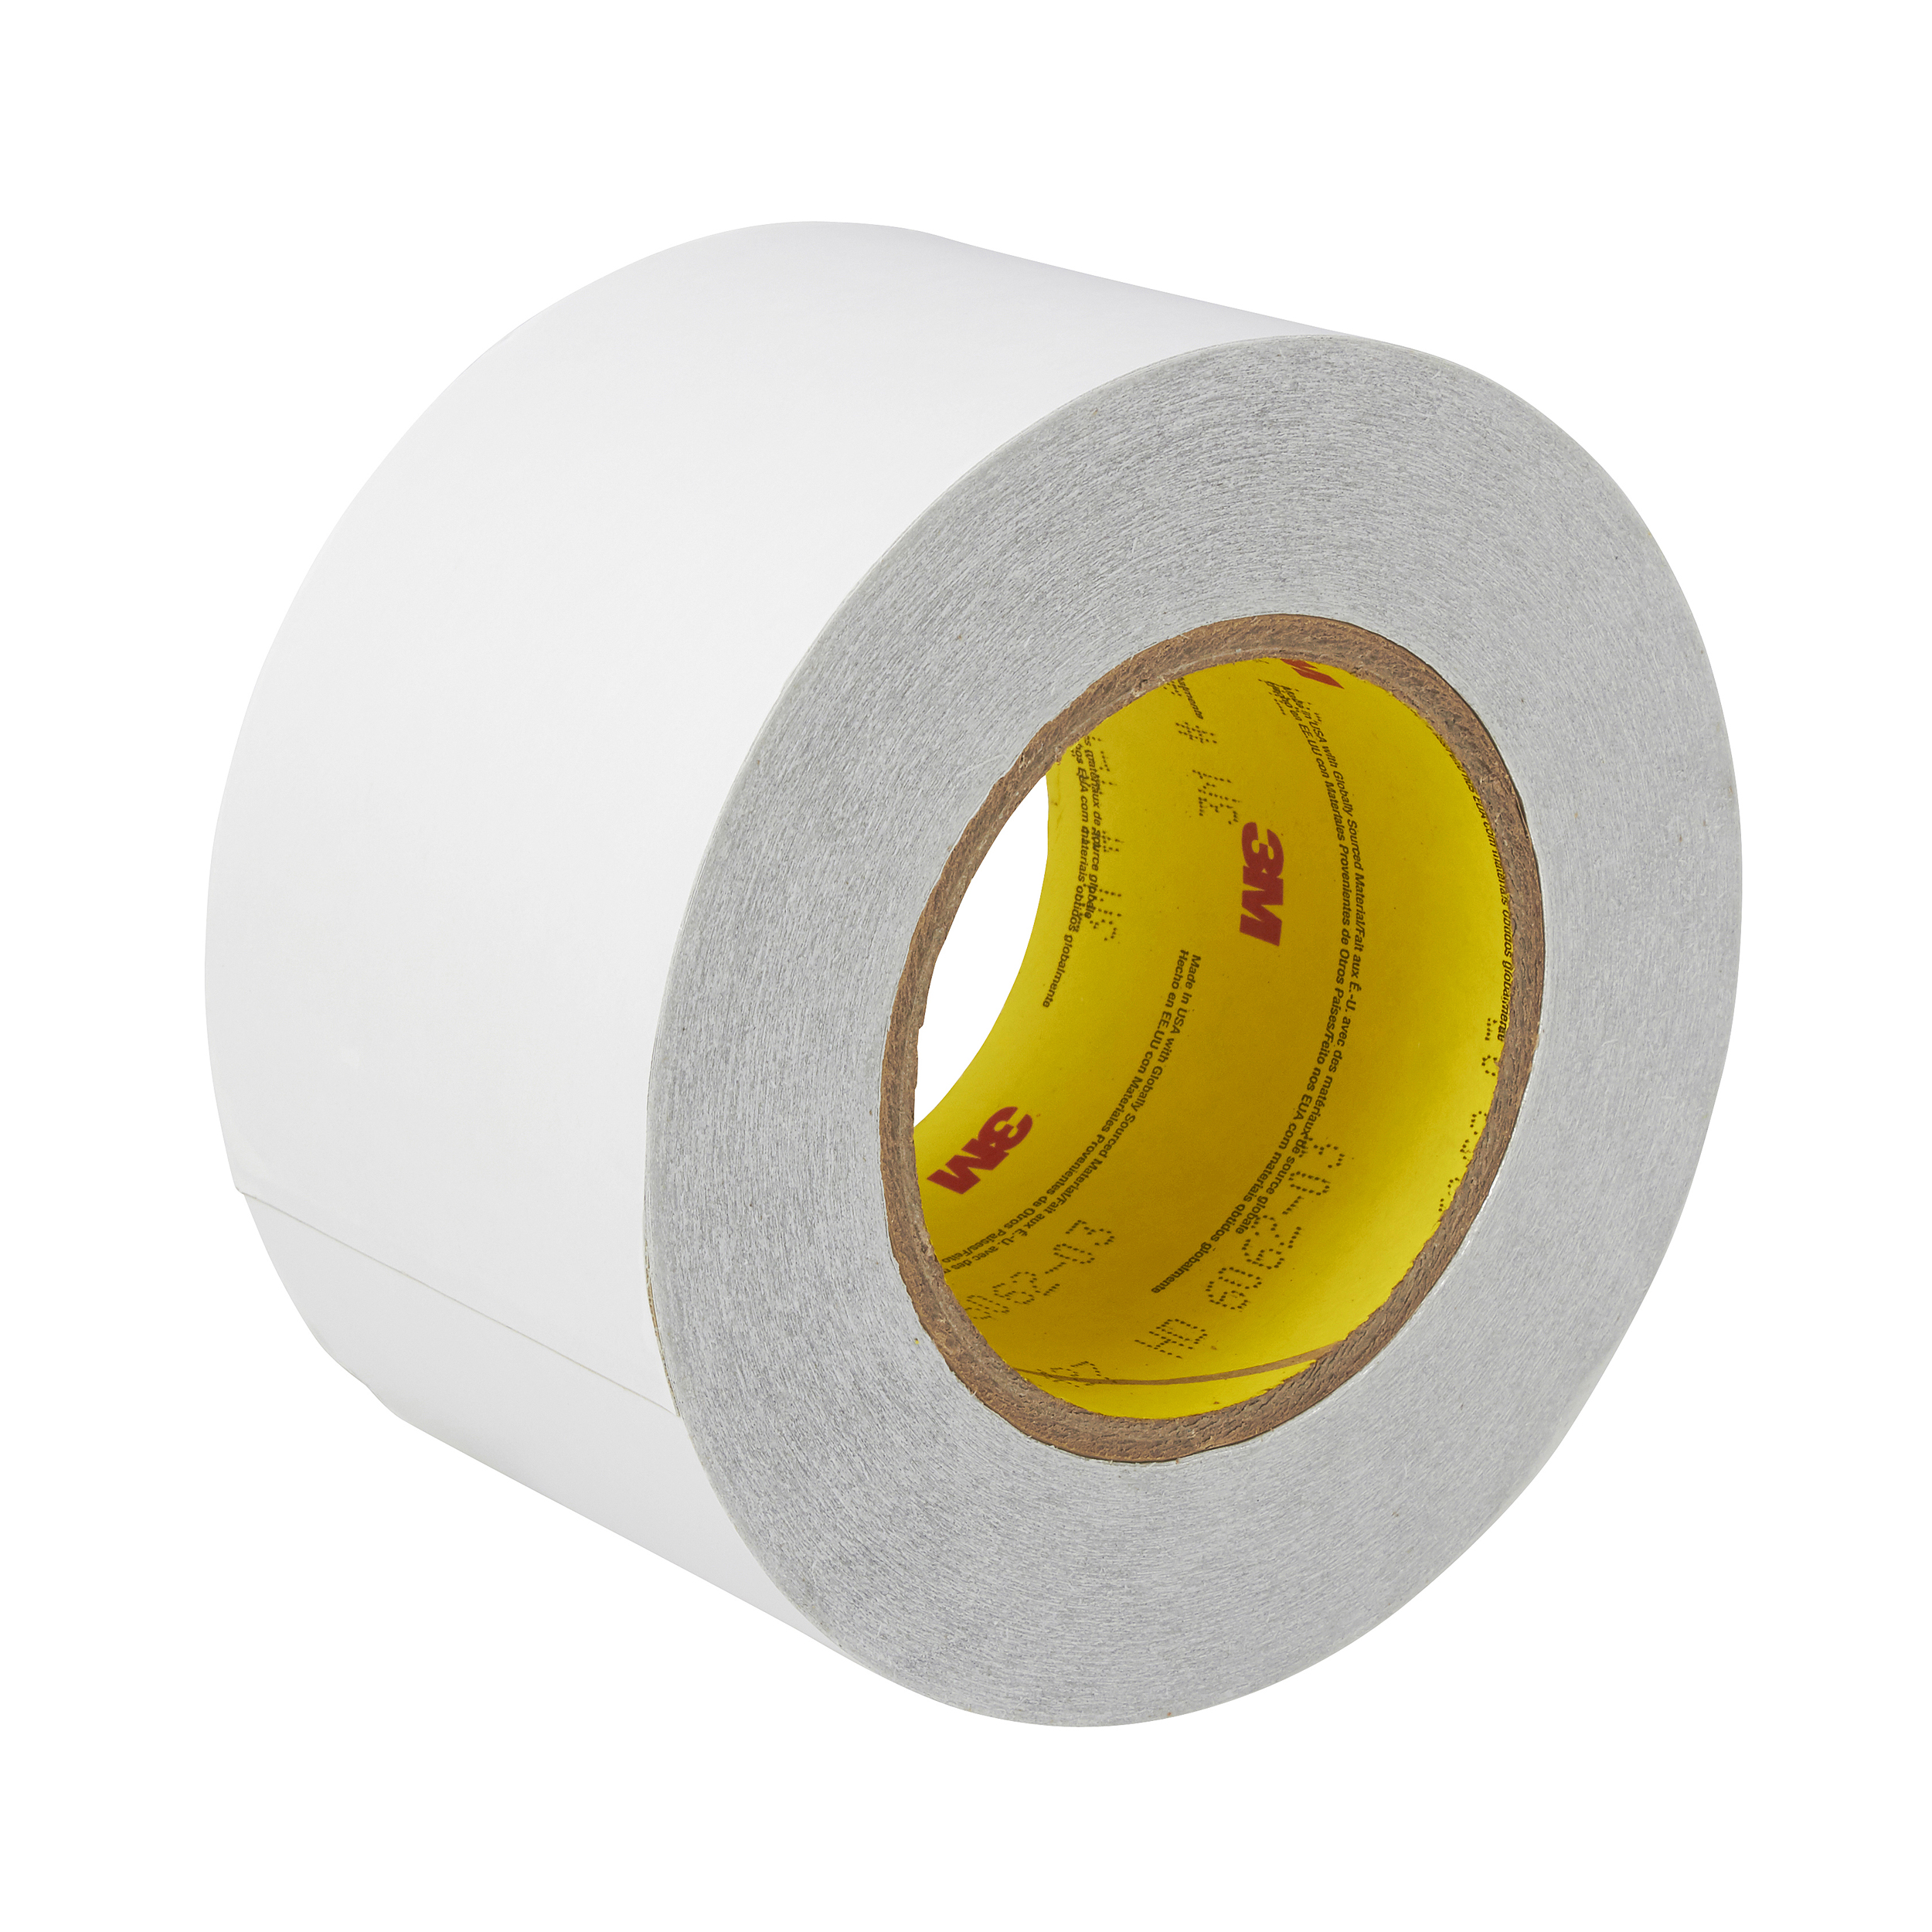 2 inches wide Similar to Venture tape NEW 3 ROLLS  Aluminum Foil Tape 50mm